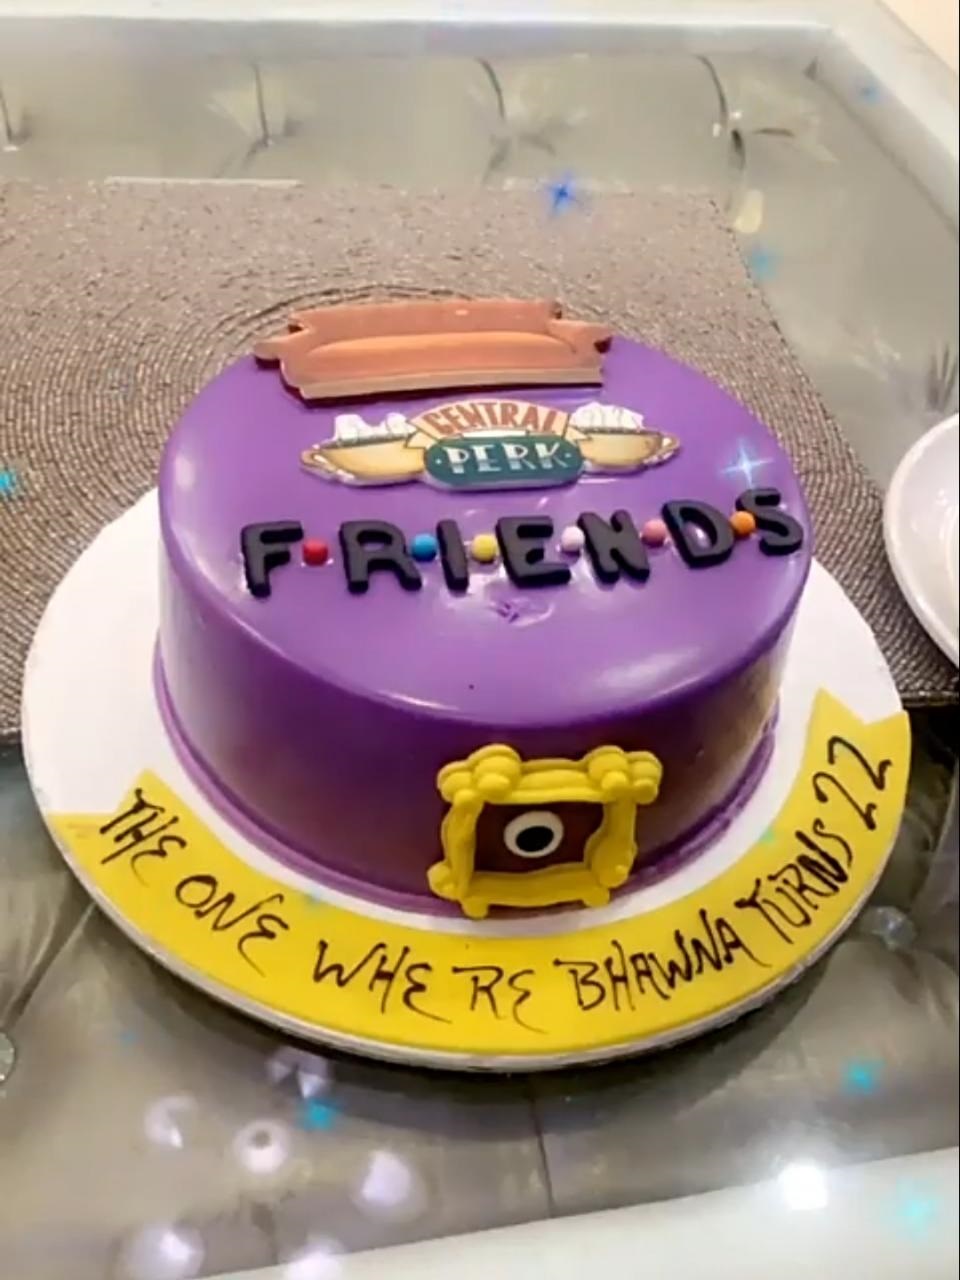 20 Unique Birthday Cake Designs For Brother With Photos